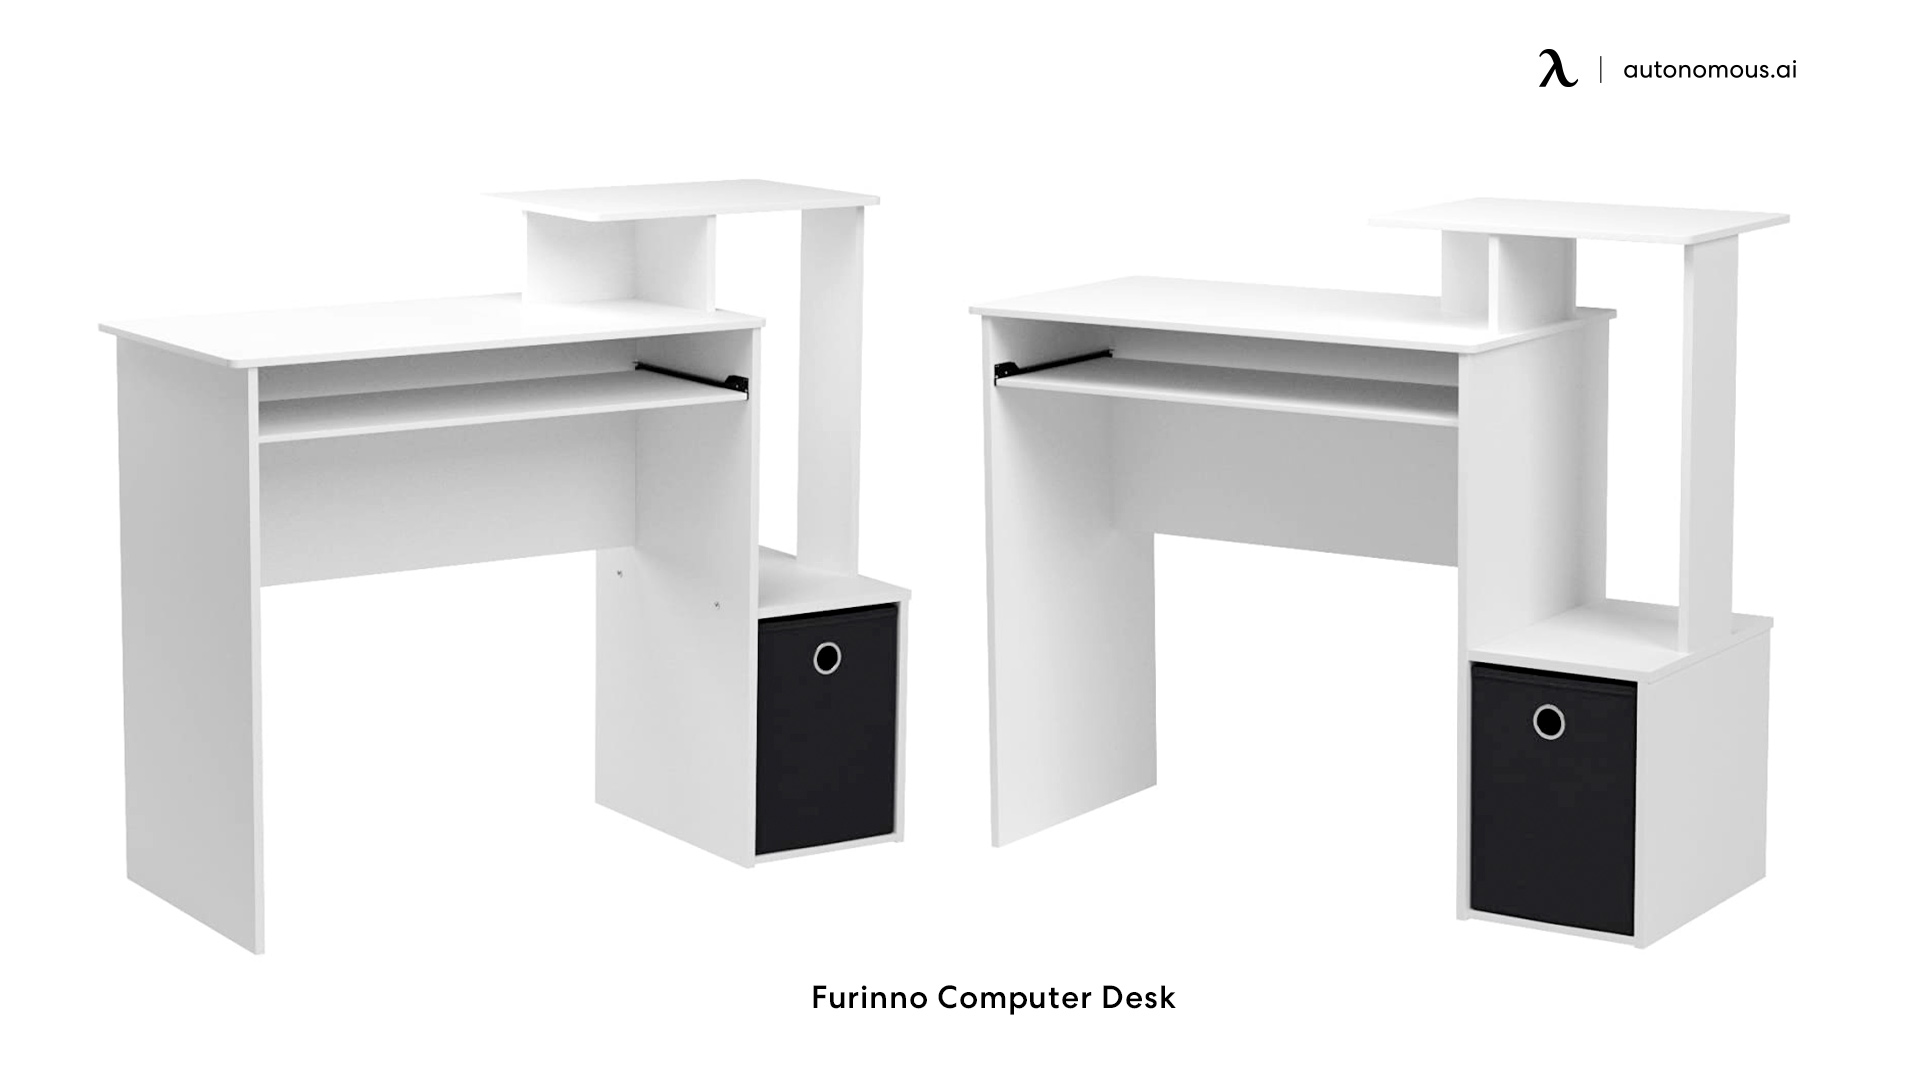 Furinno work from home desk